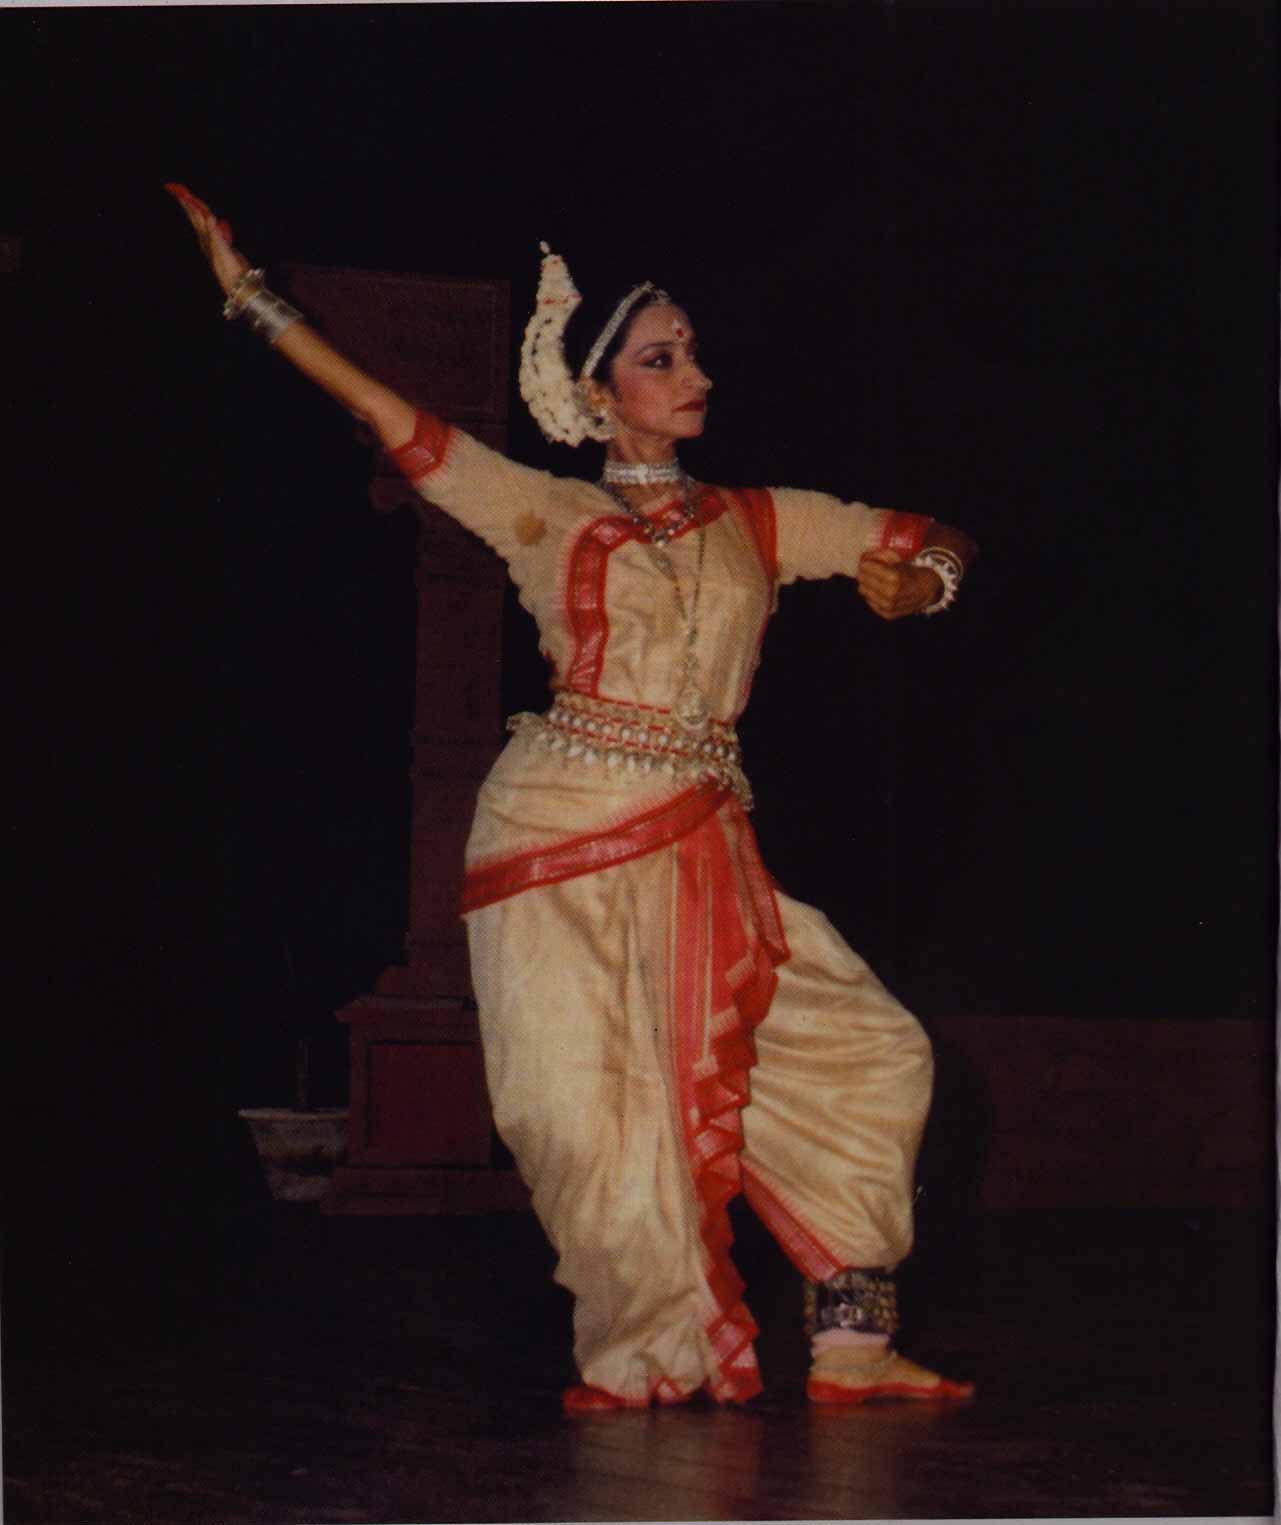 Sheema Kermani performs Indian classical dance steps in this photo from her archives. — Photo provided by Sheema Kermani